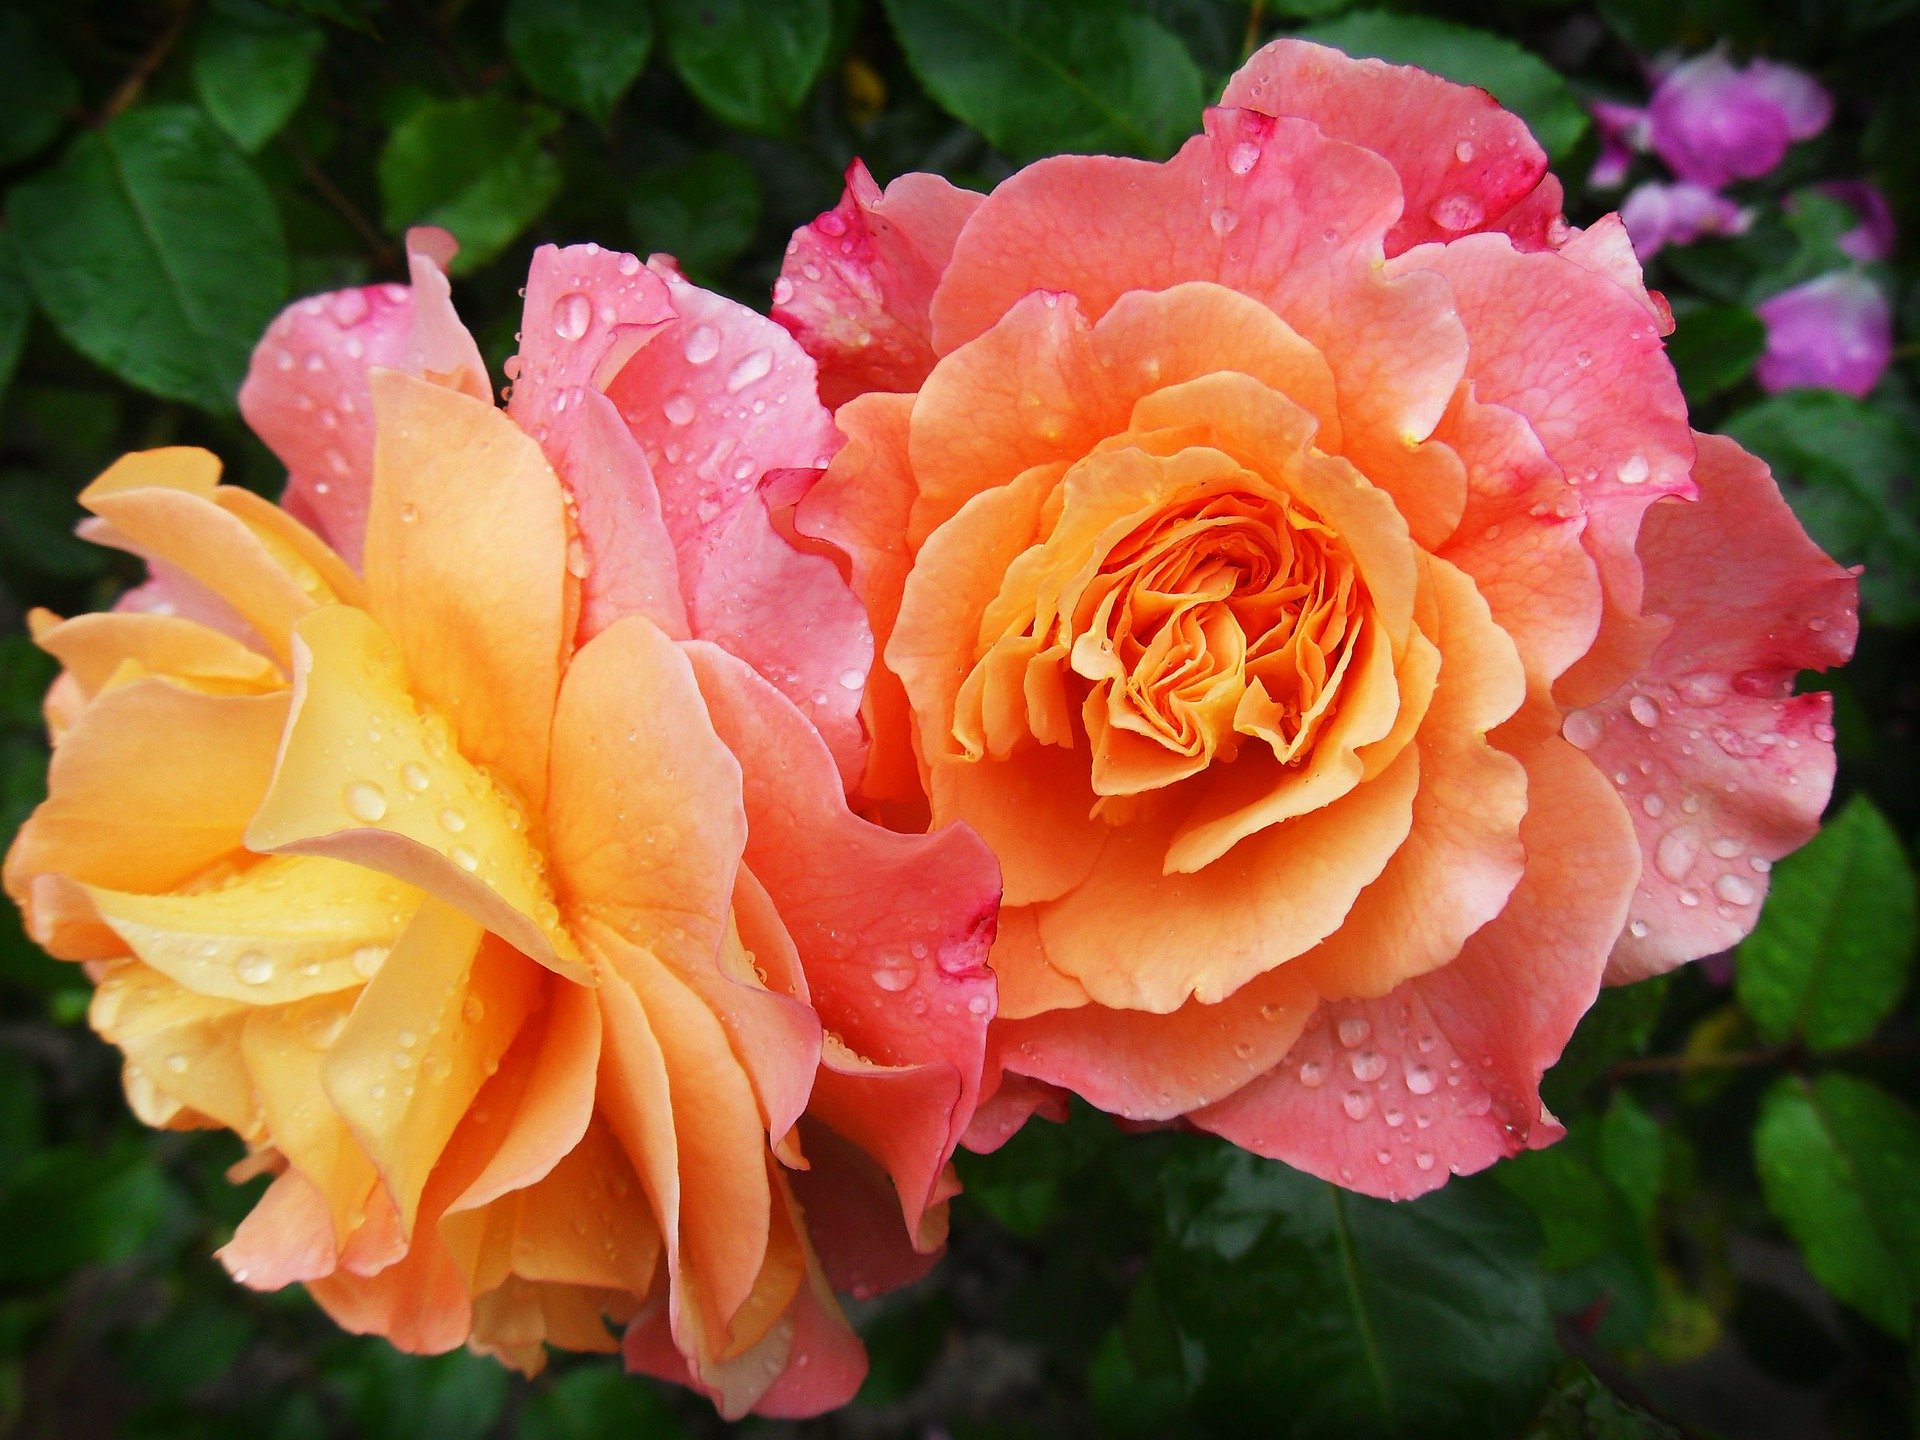 Two roses are shown with water droplets on them.